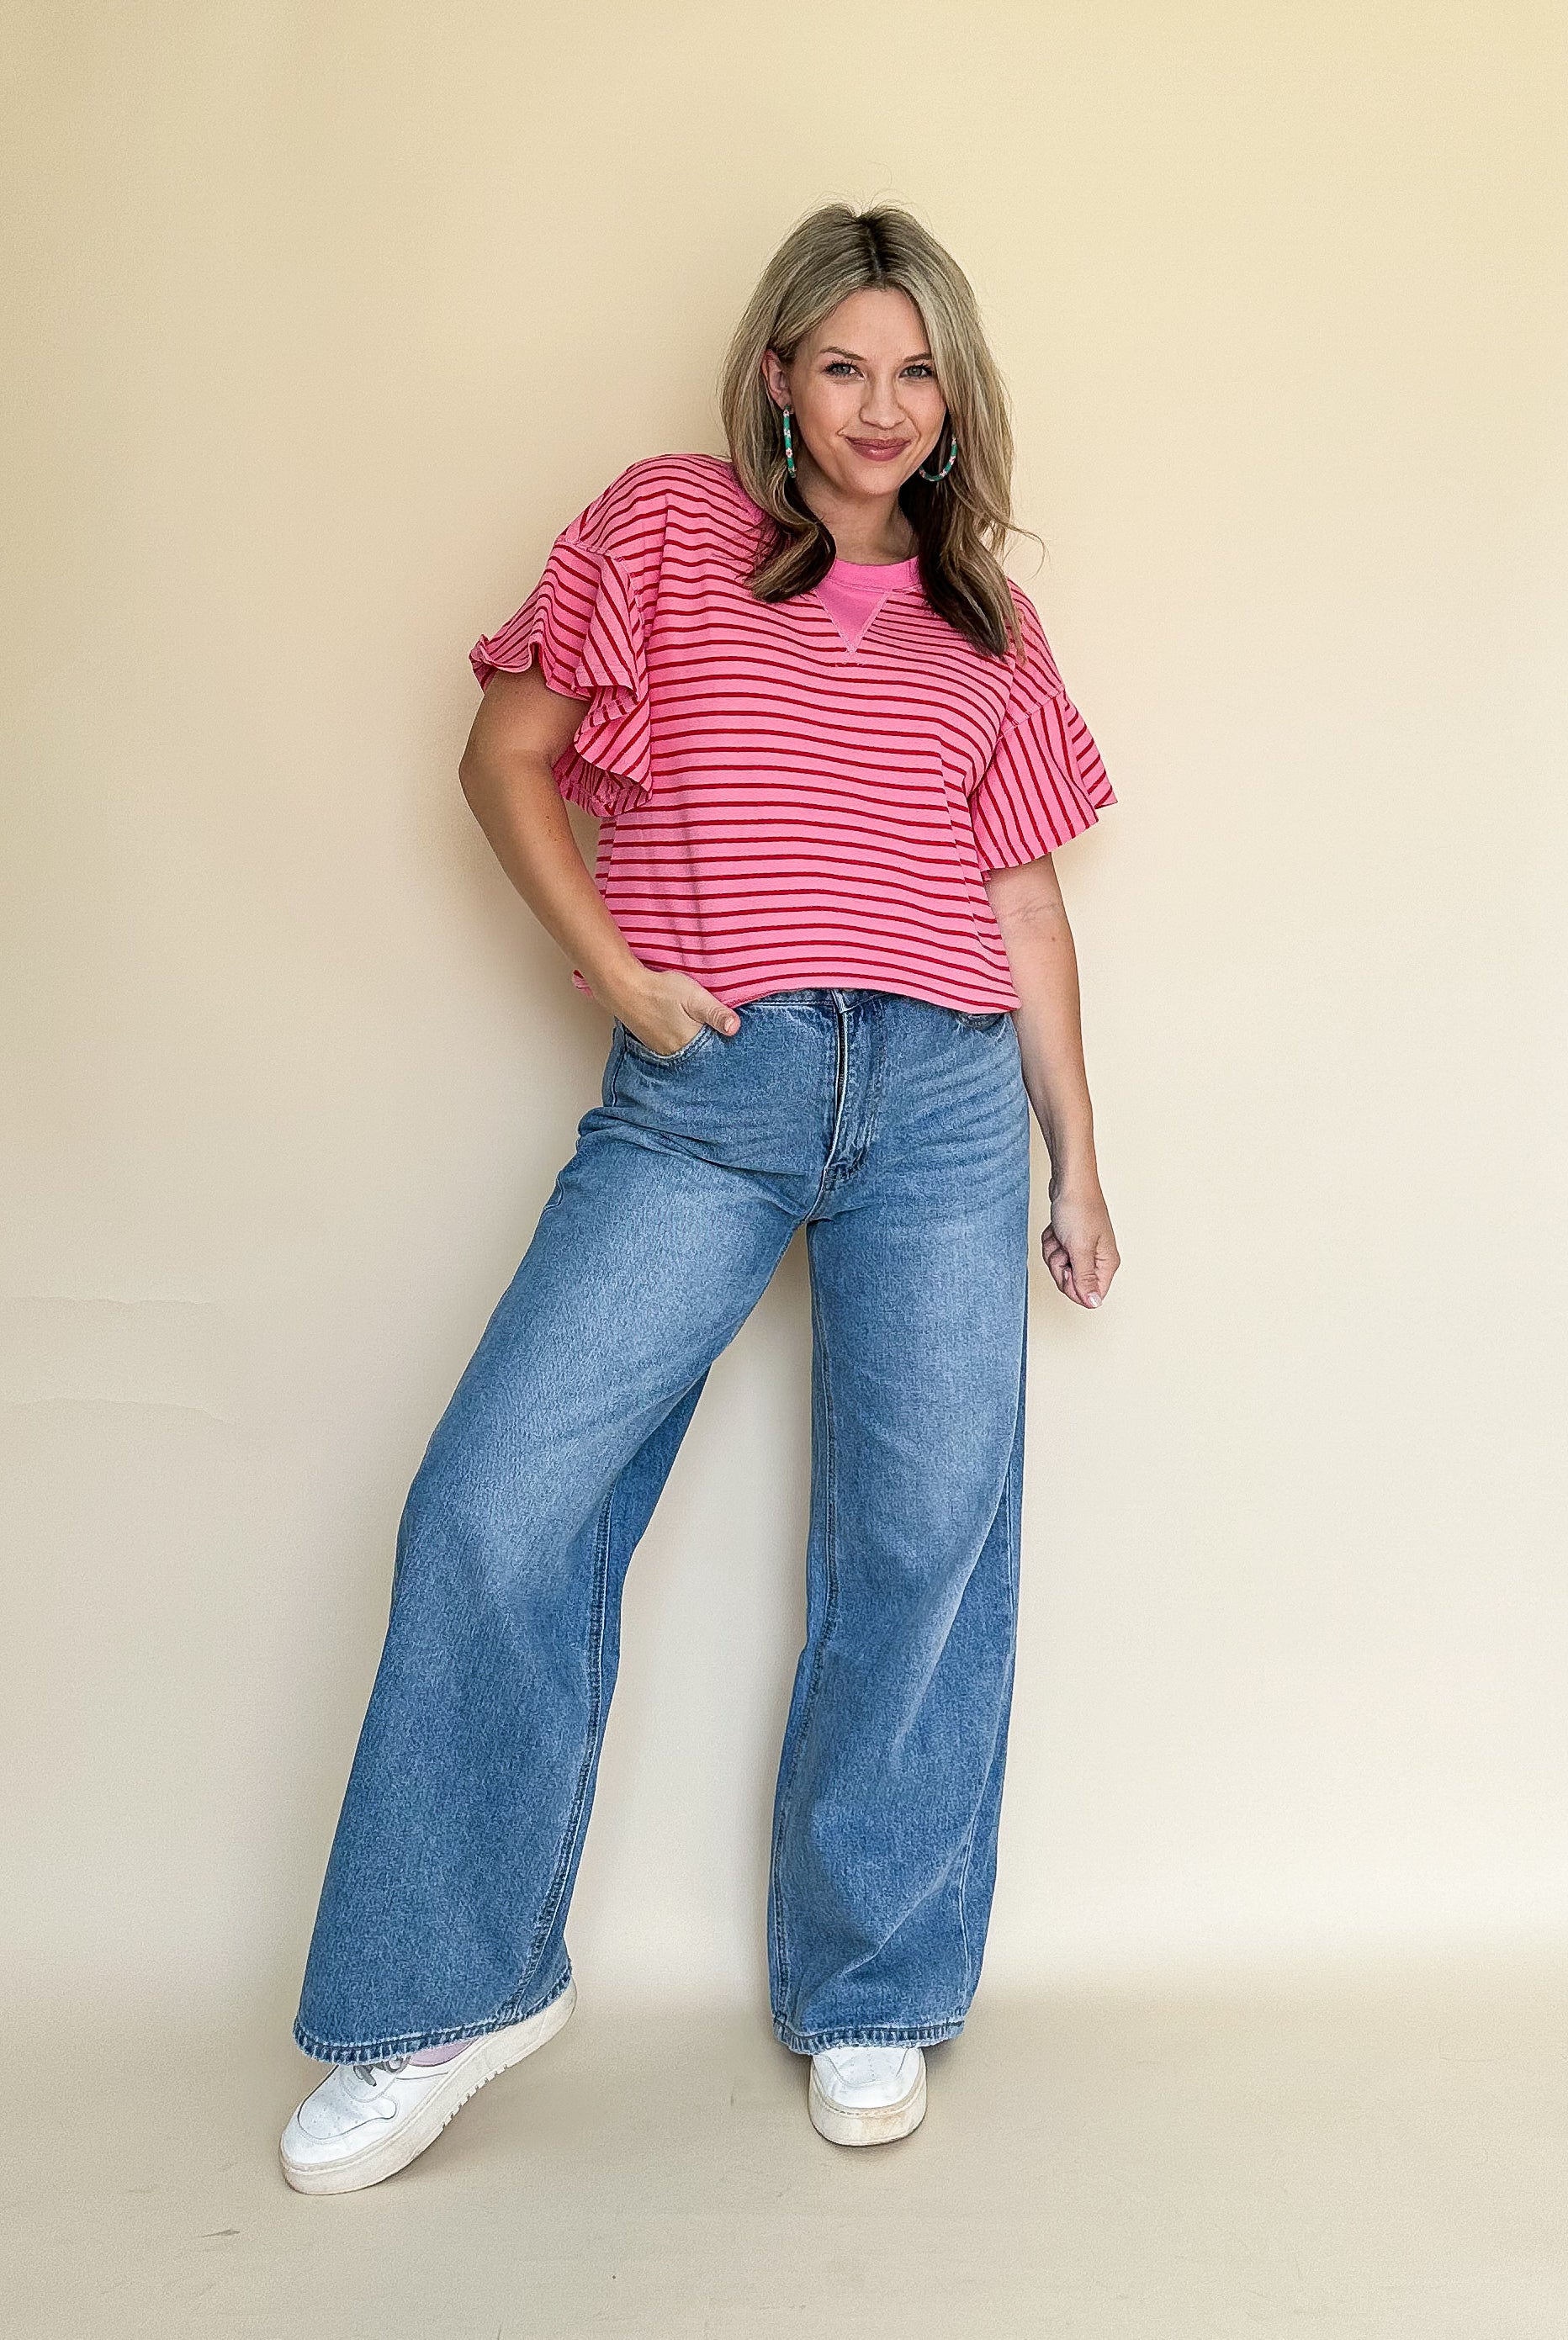 entro red & pink stripe ruffle top